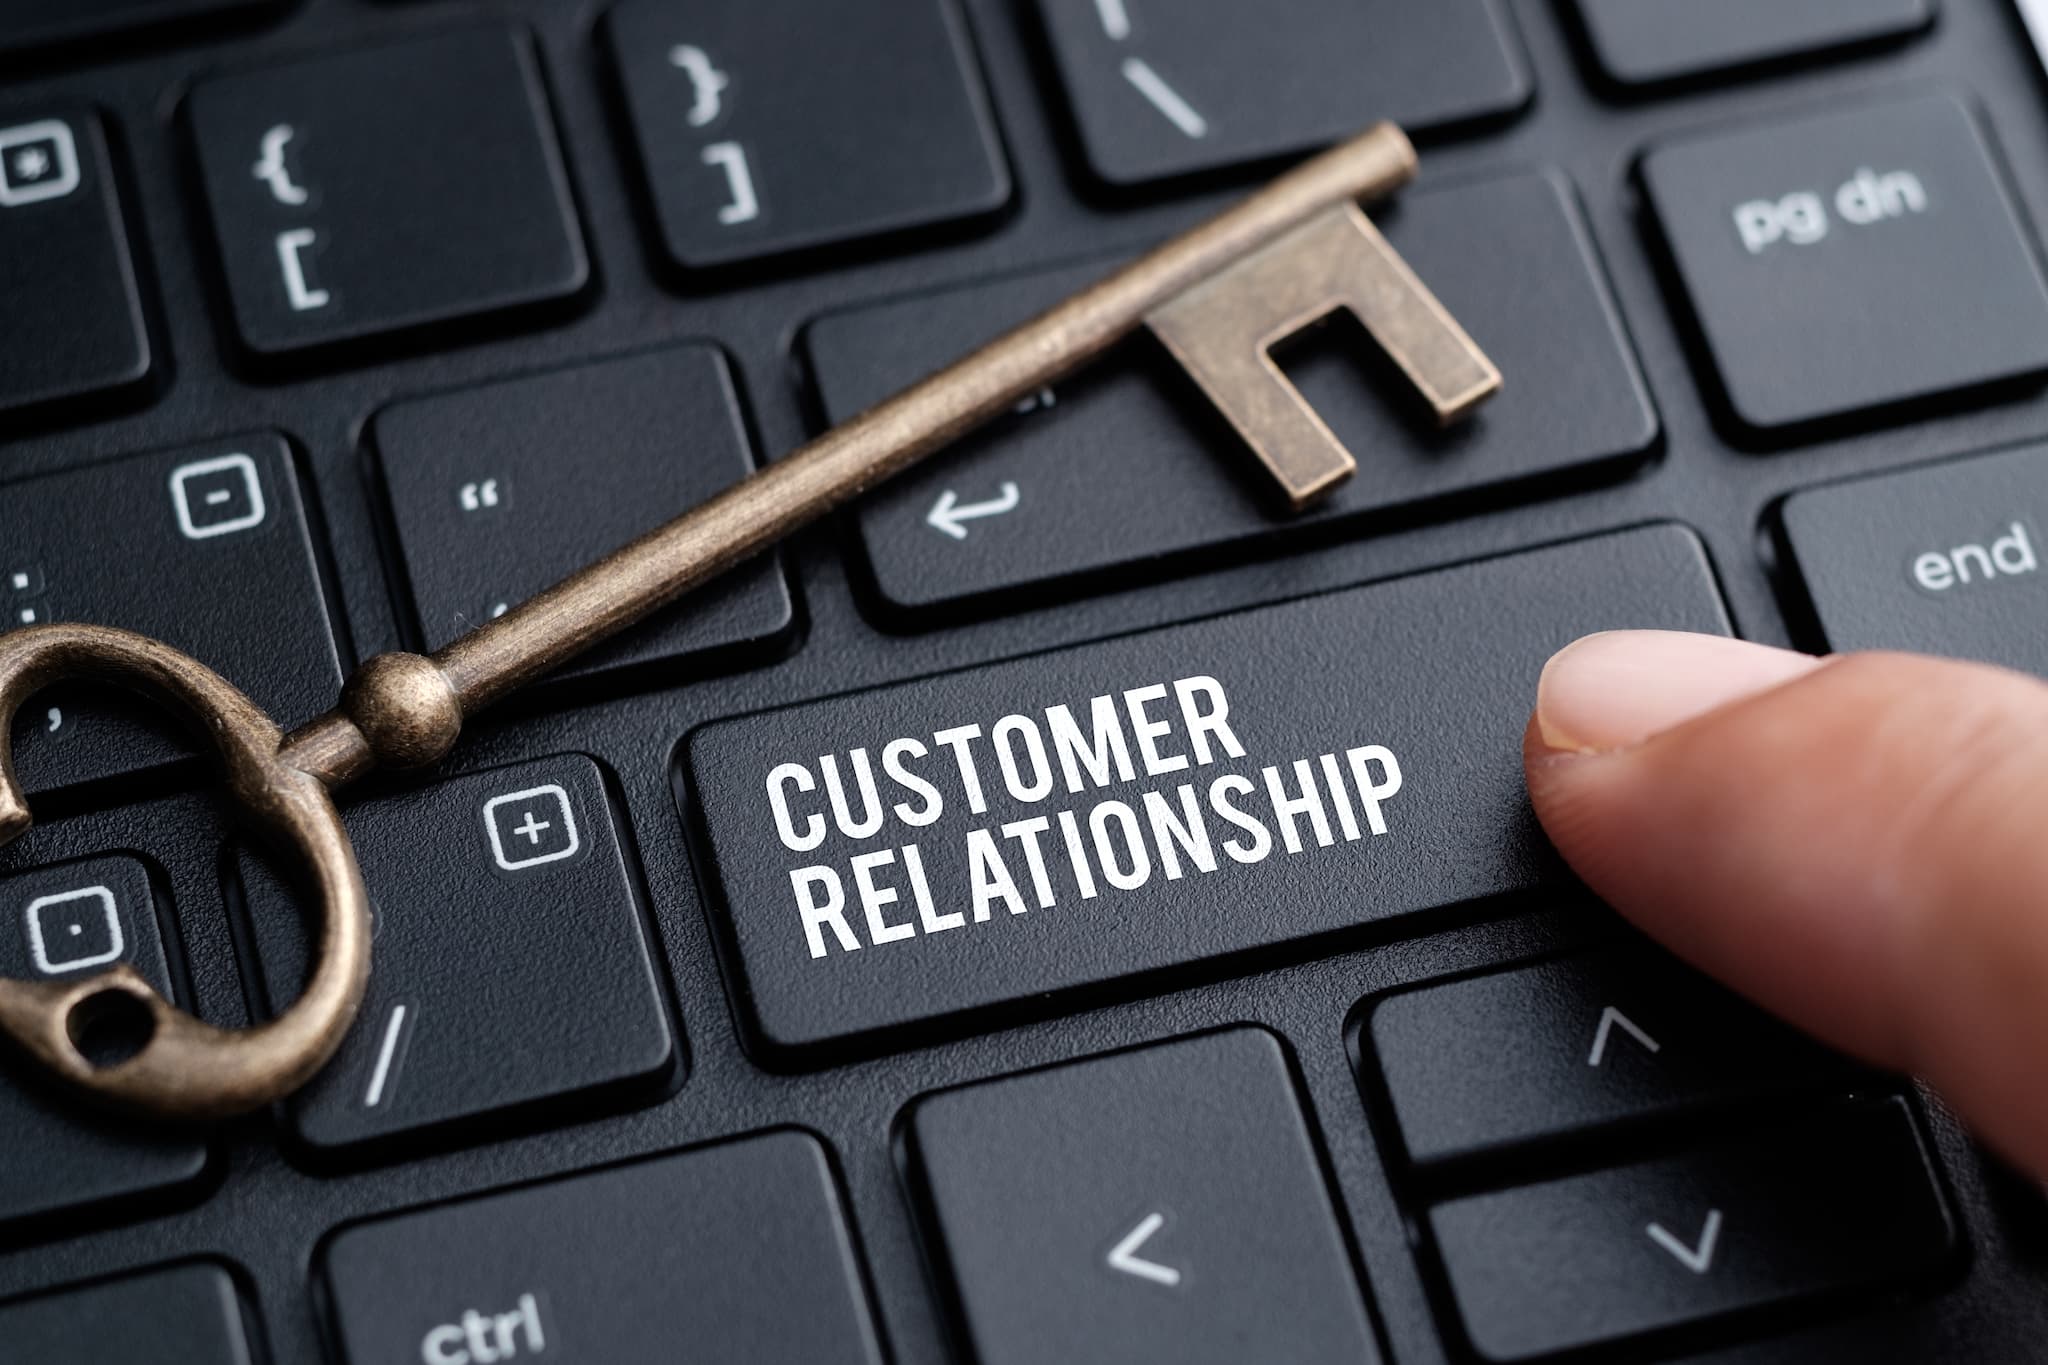 Five ways an SME can build customer loyalty through effective communication